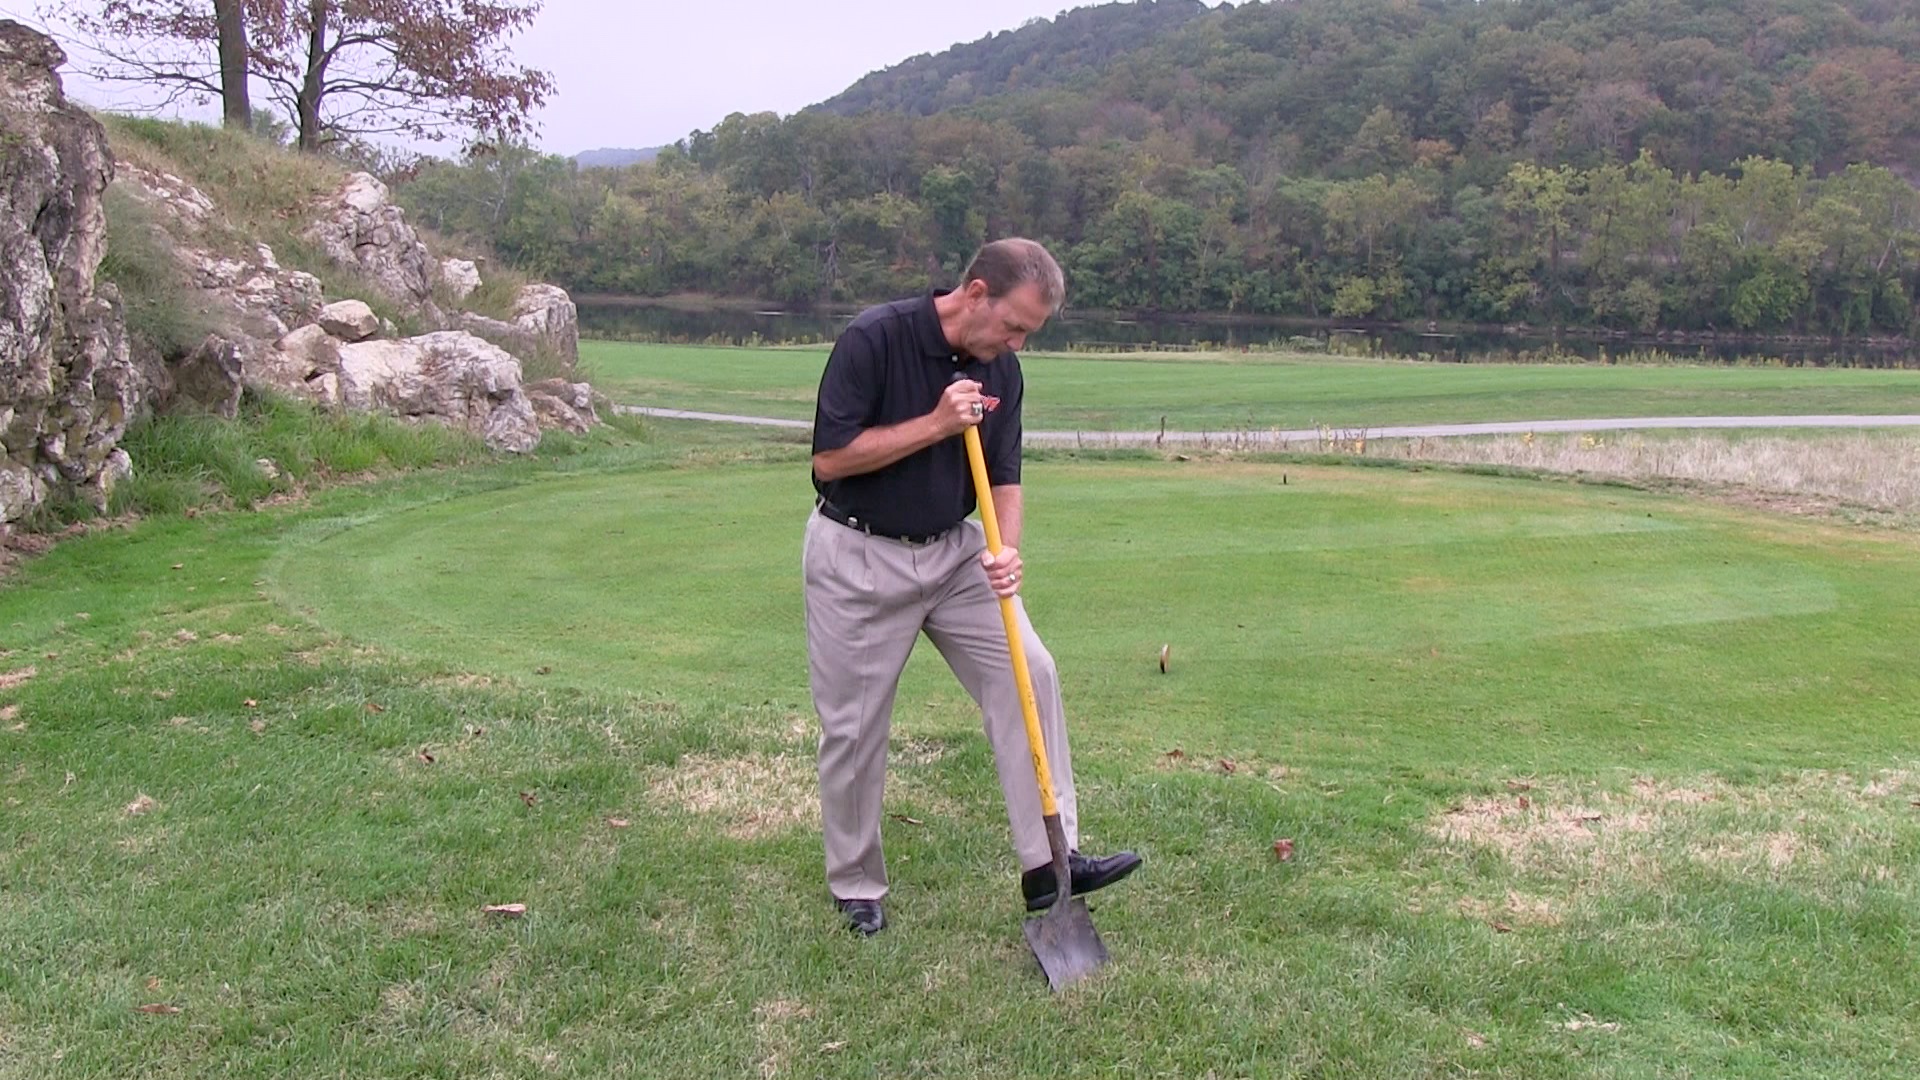 The head golf coach at Virginia Tech, Jay Hardwick, uses a shovel to dig up some soil. He's checking to see whether there are any layyers of clippings and dead roots.